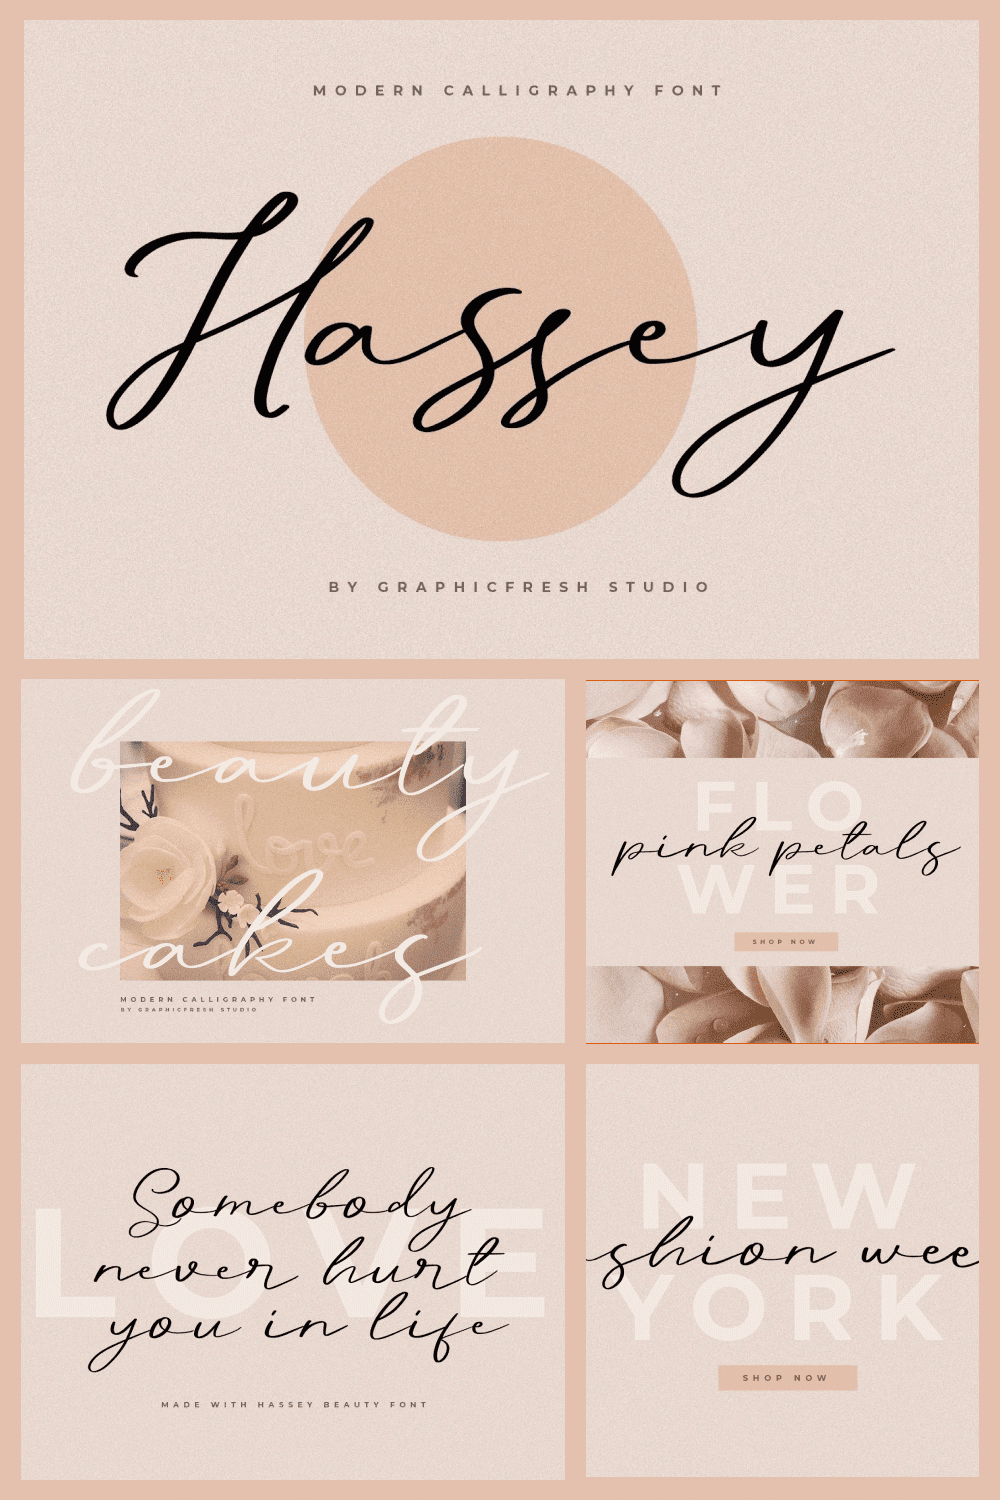 196 Hassey – A Modern Calligraphy Font